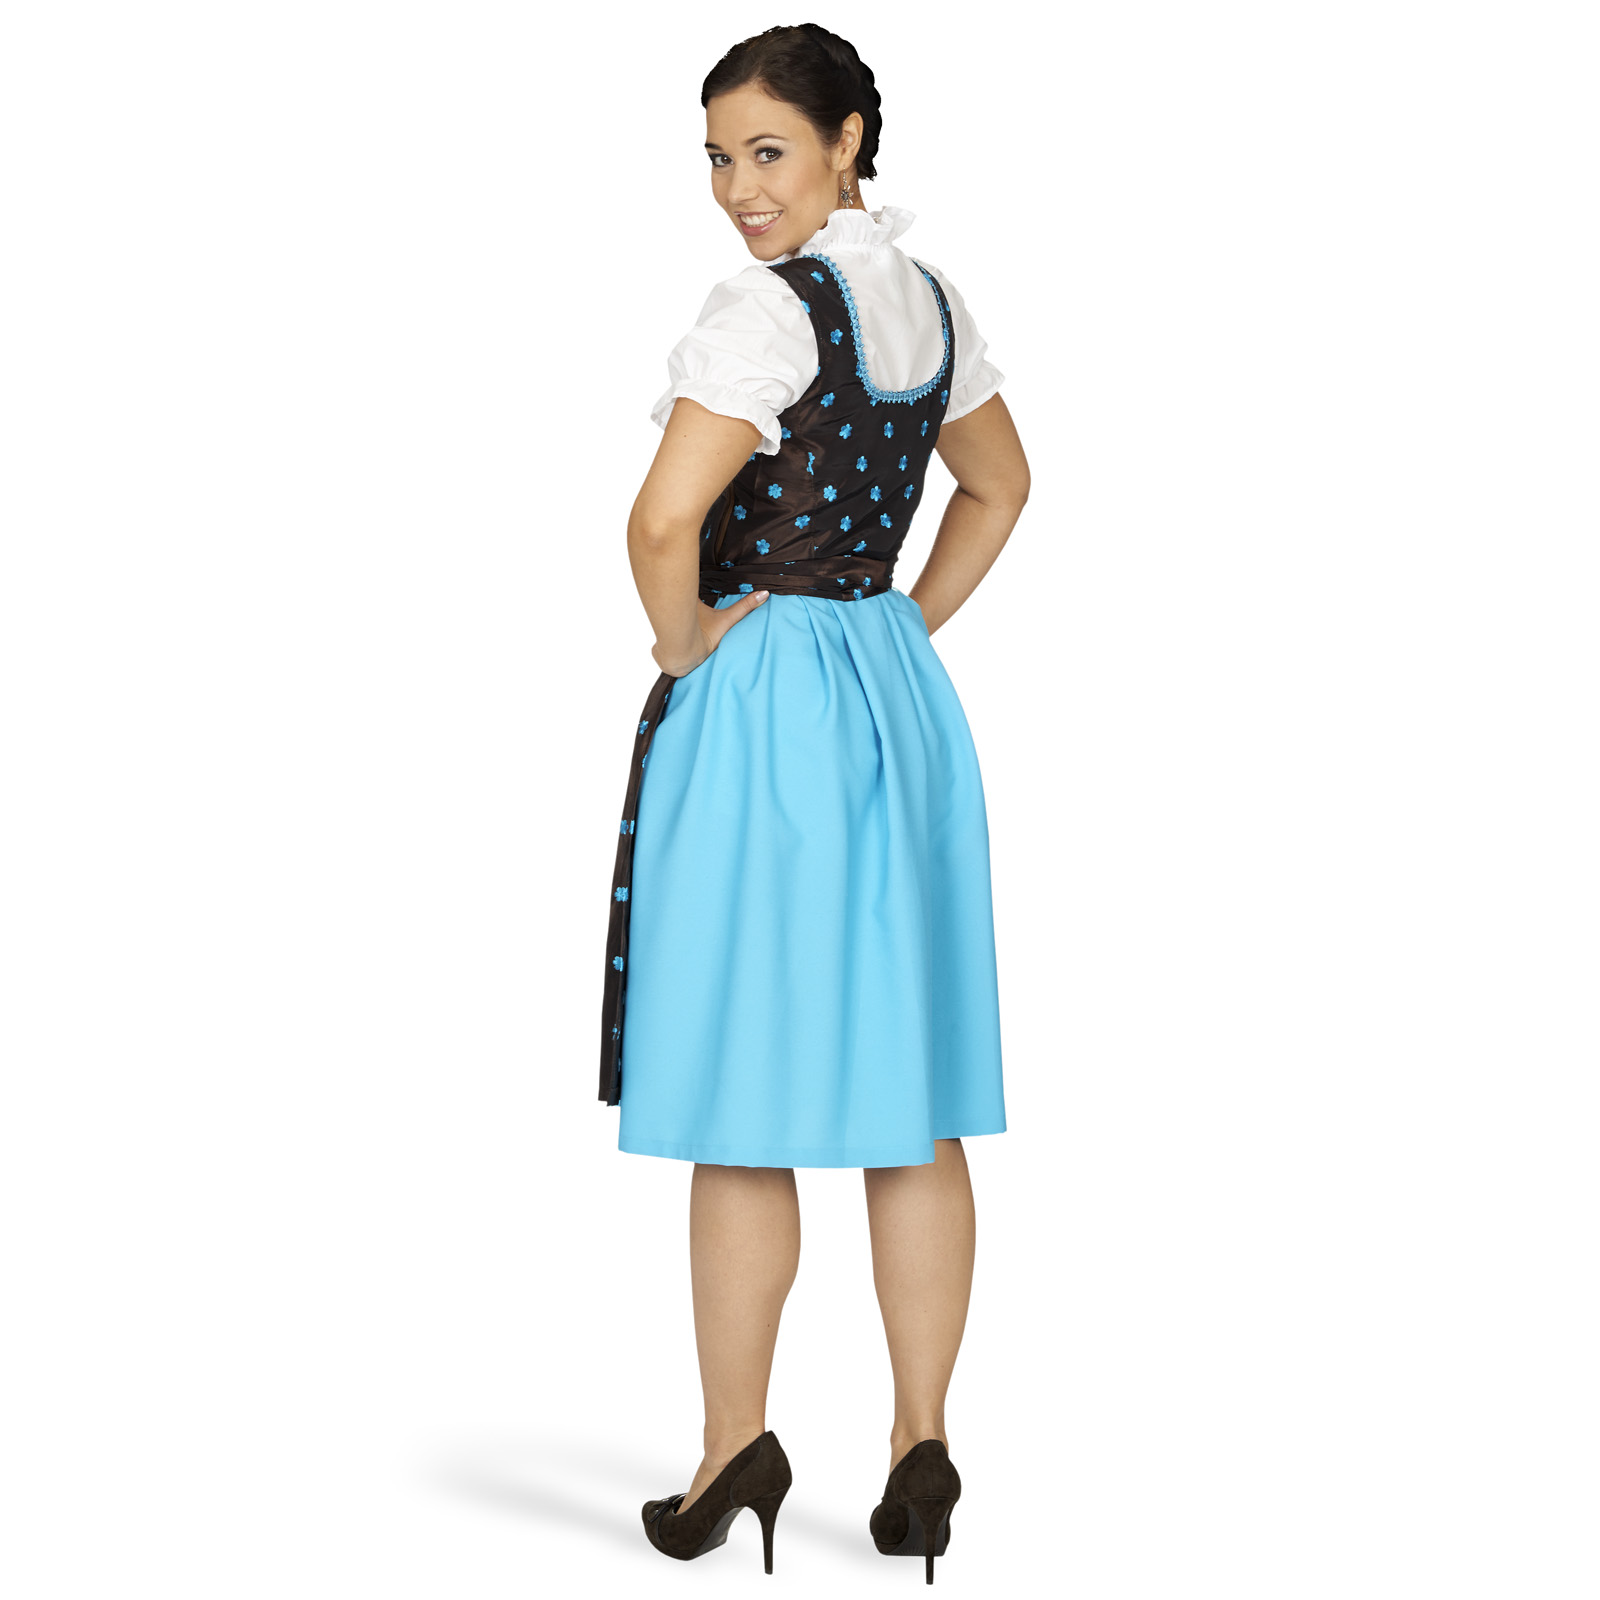 Edelweiss Dirndl - Brown/Turquoise Traditional Dress with Blouse Insert